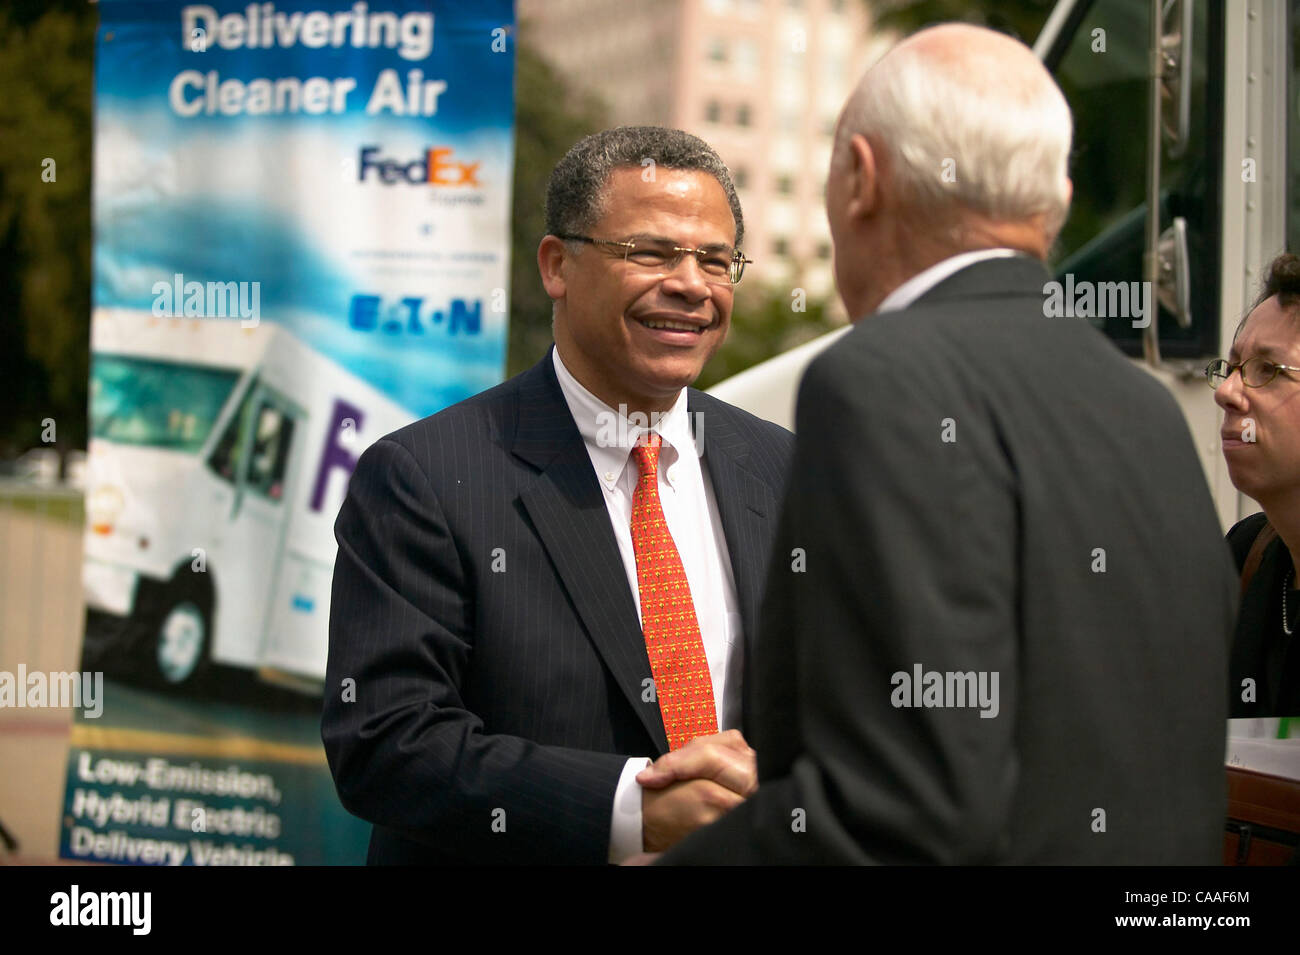 Mar 31, 2003; Sacramento, CA, USA; Eaton Corporation's Senior Vice President Jim Sweetnam talks with person at   Environmental Defense, FedEx Express, and Eaton Corporation unveil new hybrid delivery trucks that emit 90% fewer emissions and go 50% further on a gallon of gas Stock Photo